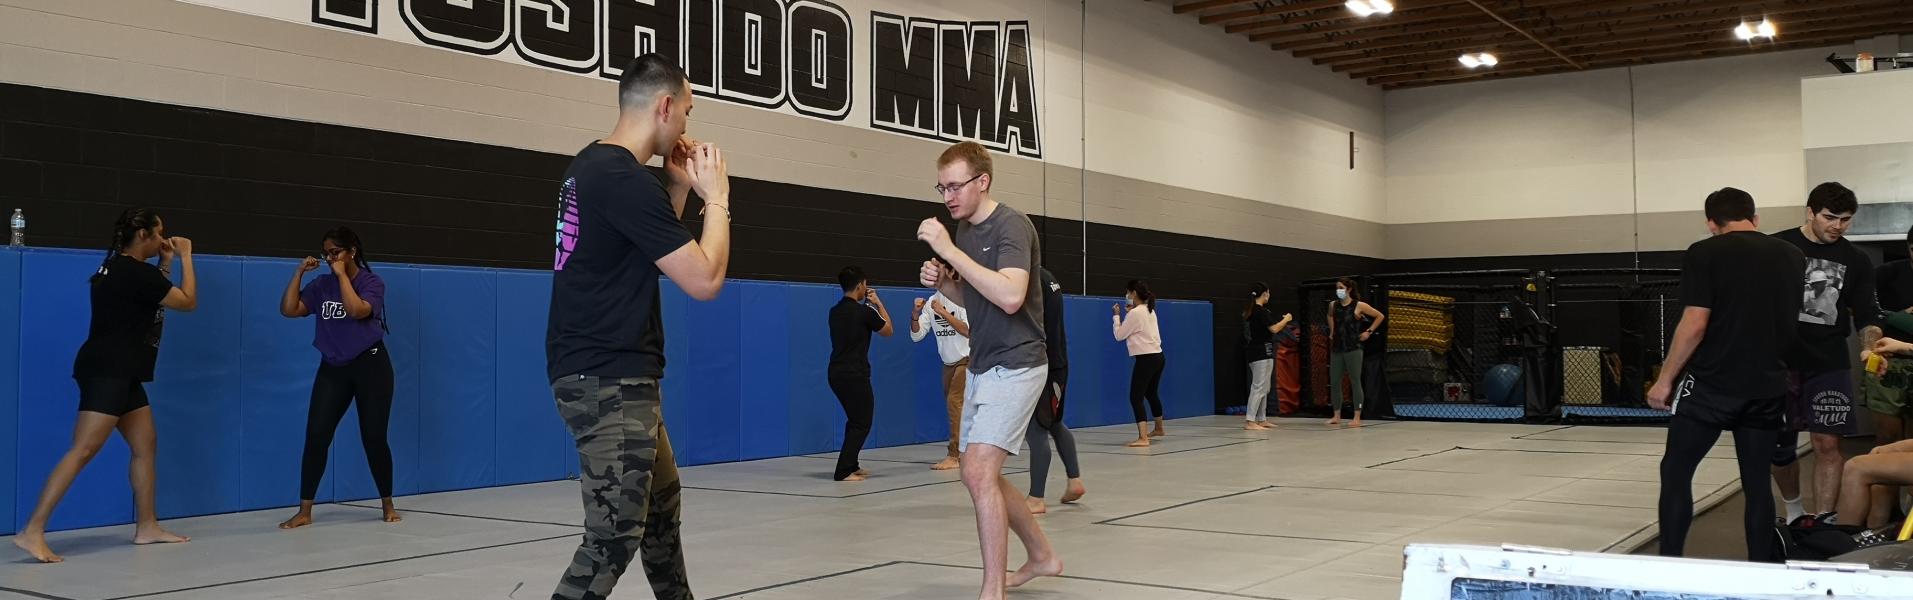 Students squaring-up and practicing traditional stances in the Muay Thai class at Toshido MMA